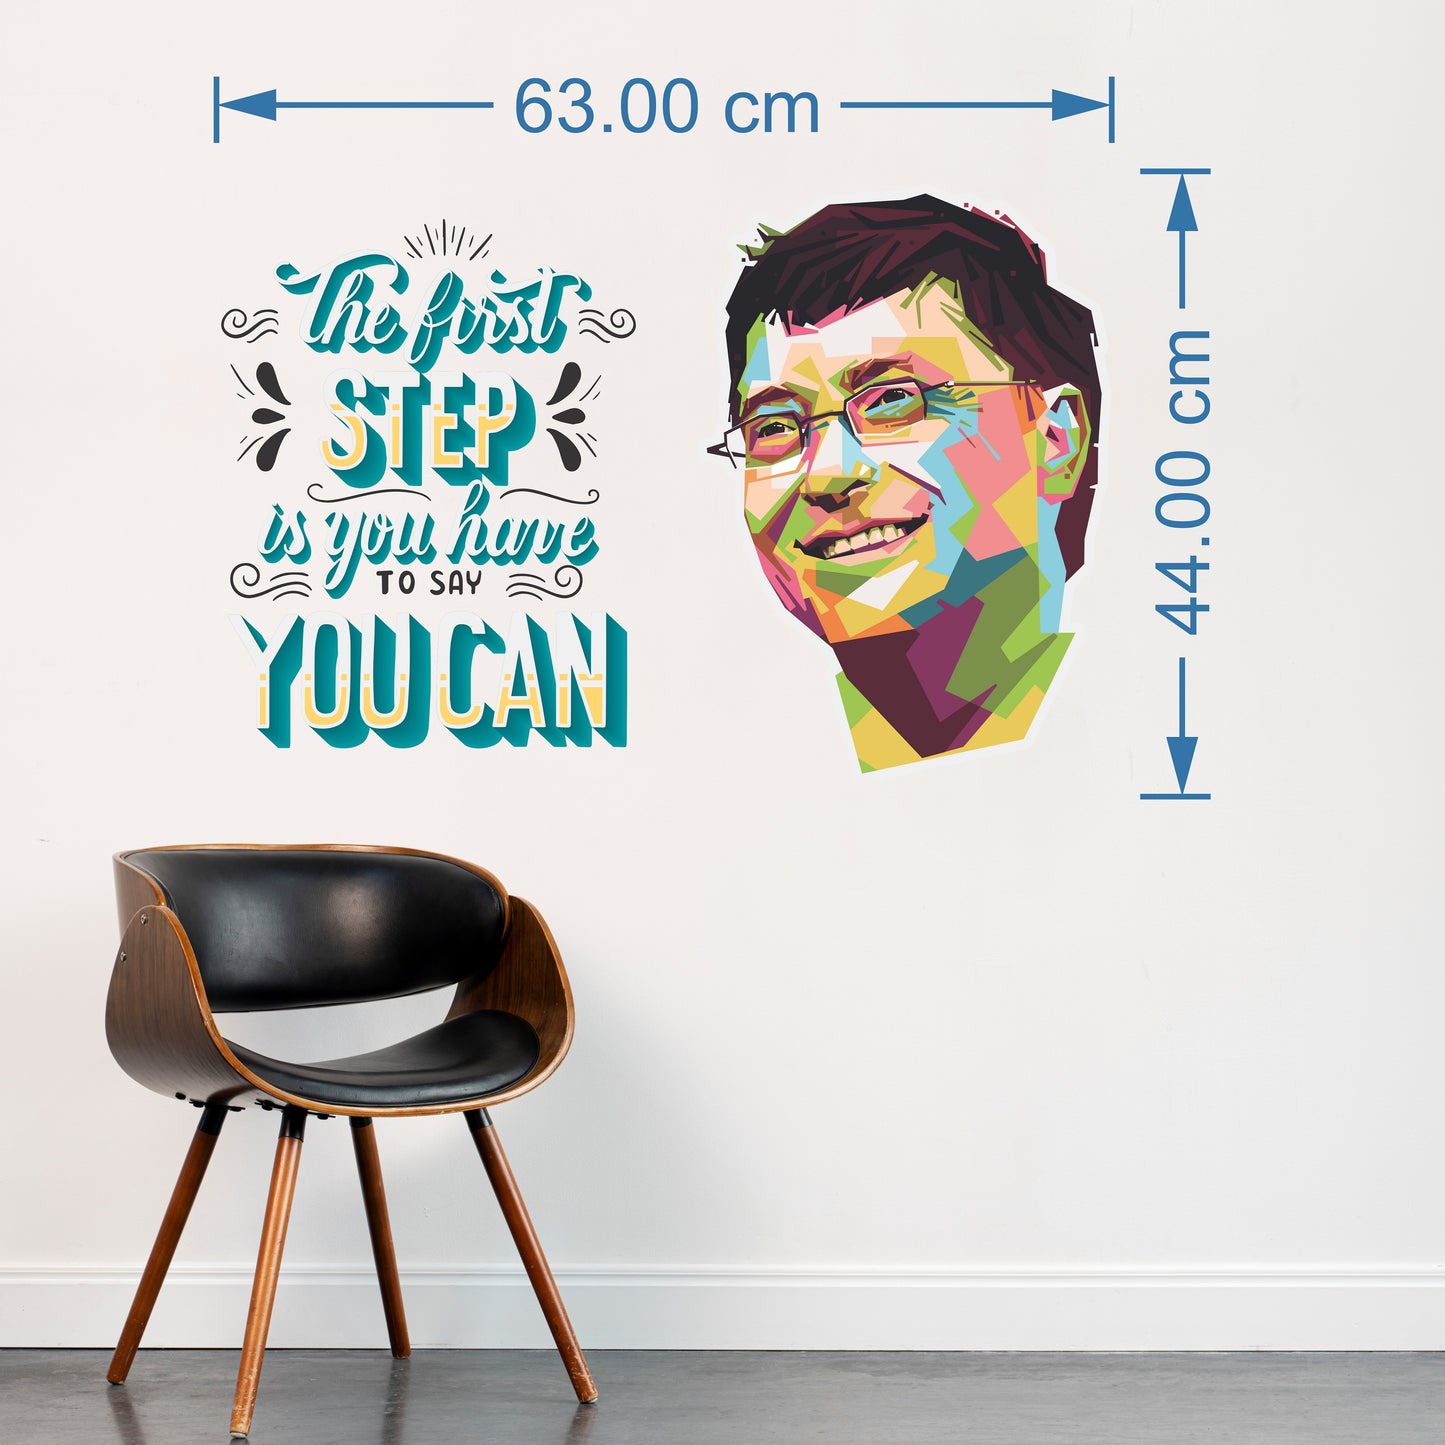 iberry's Inspirational Motivational Quotes Wall Sticker, First Step is You Have to say You can"- 44 x 63 cm Wall Stickers for Study- Office-05